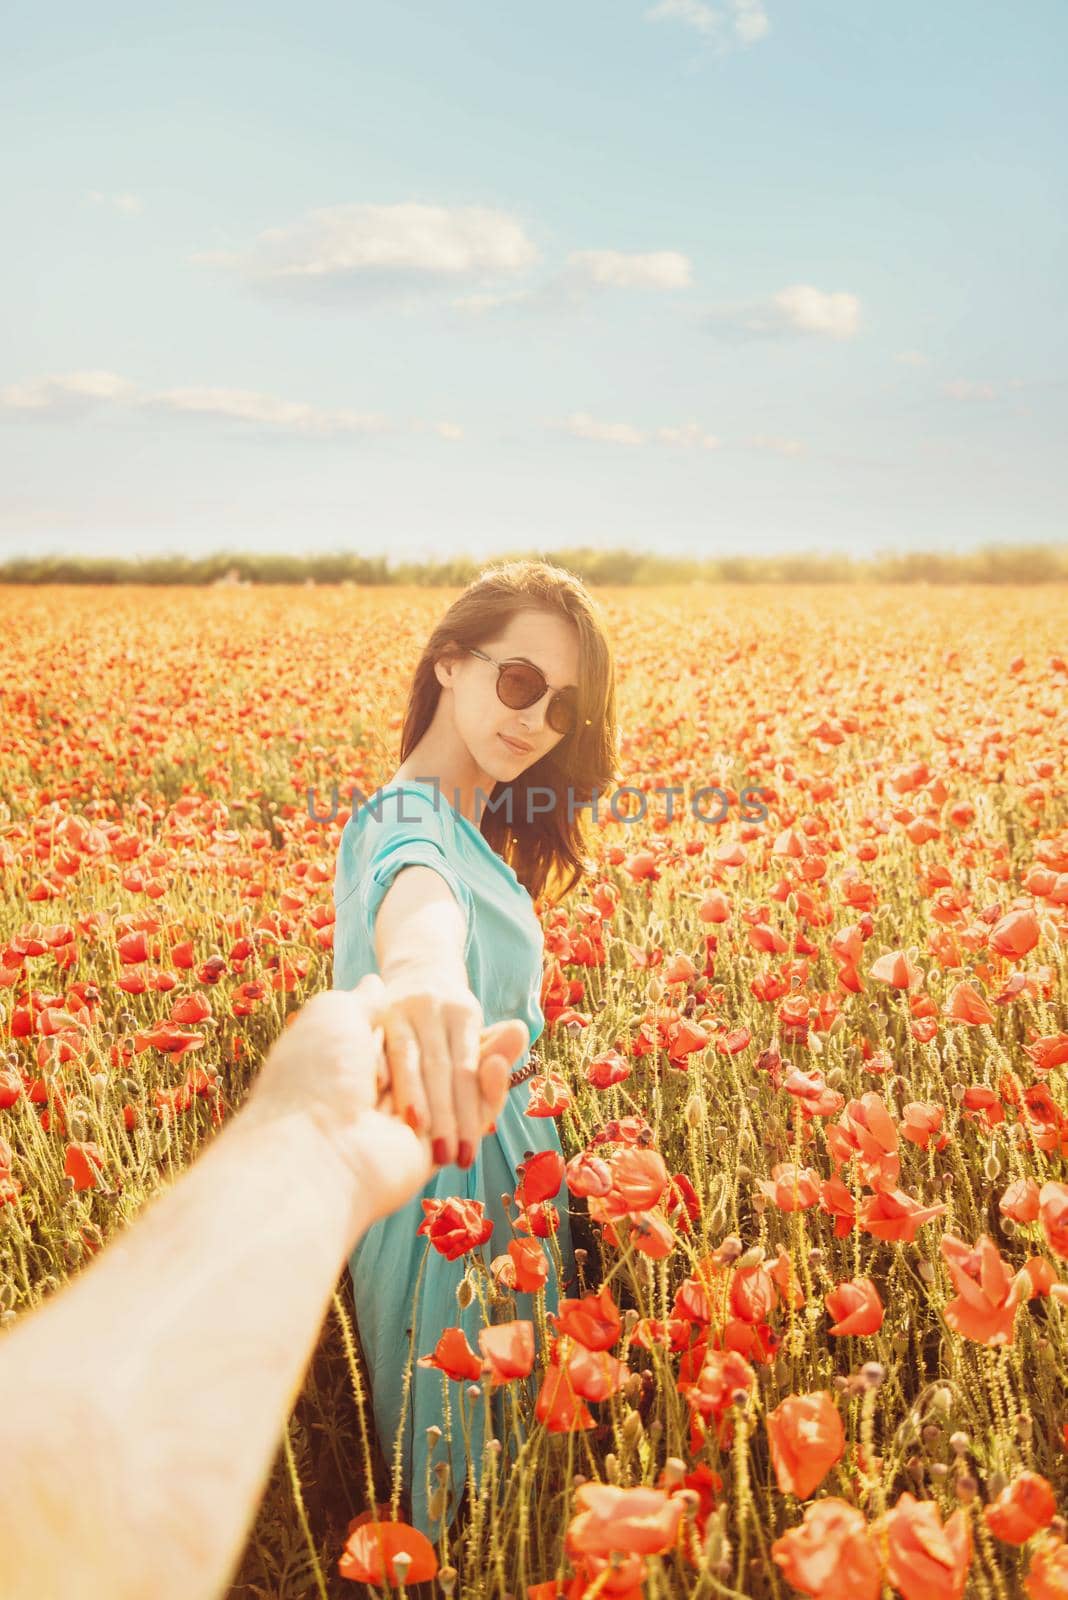 Beautiful young woman holding man's hand and leading him in poppies meadow outdoor, looking at camera. Point of view.